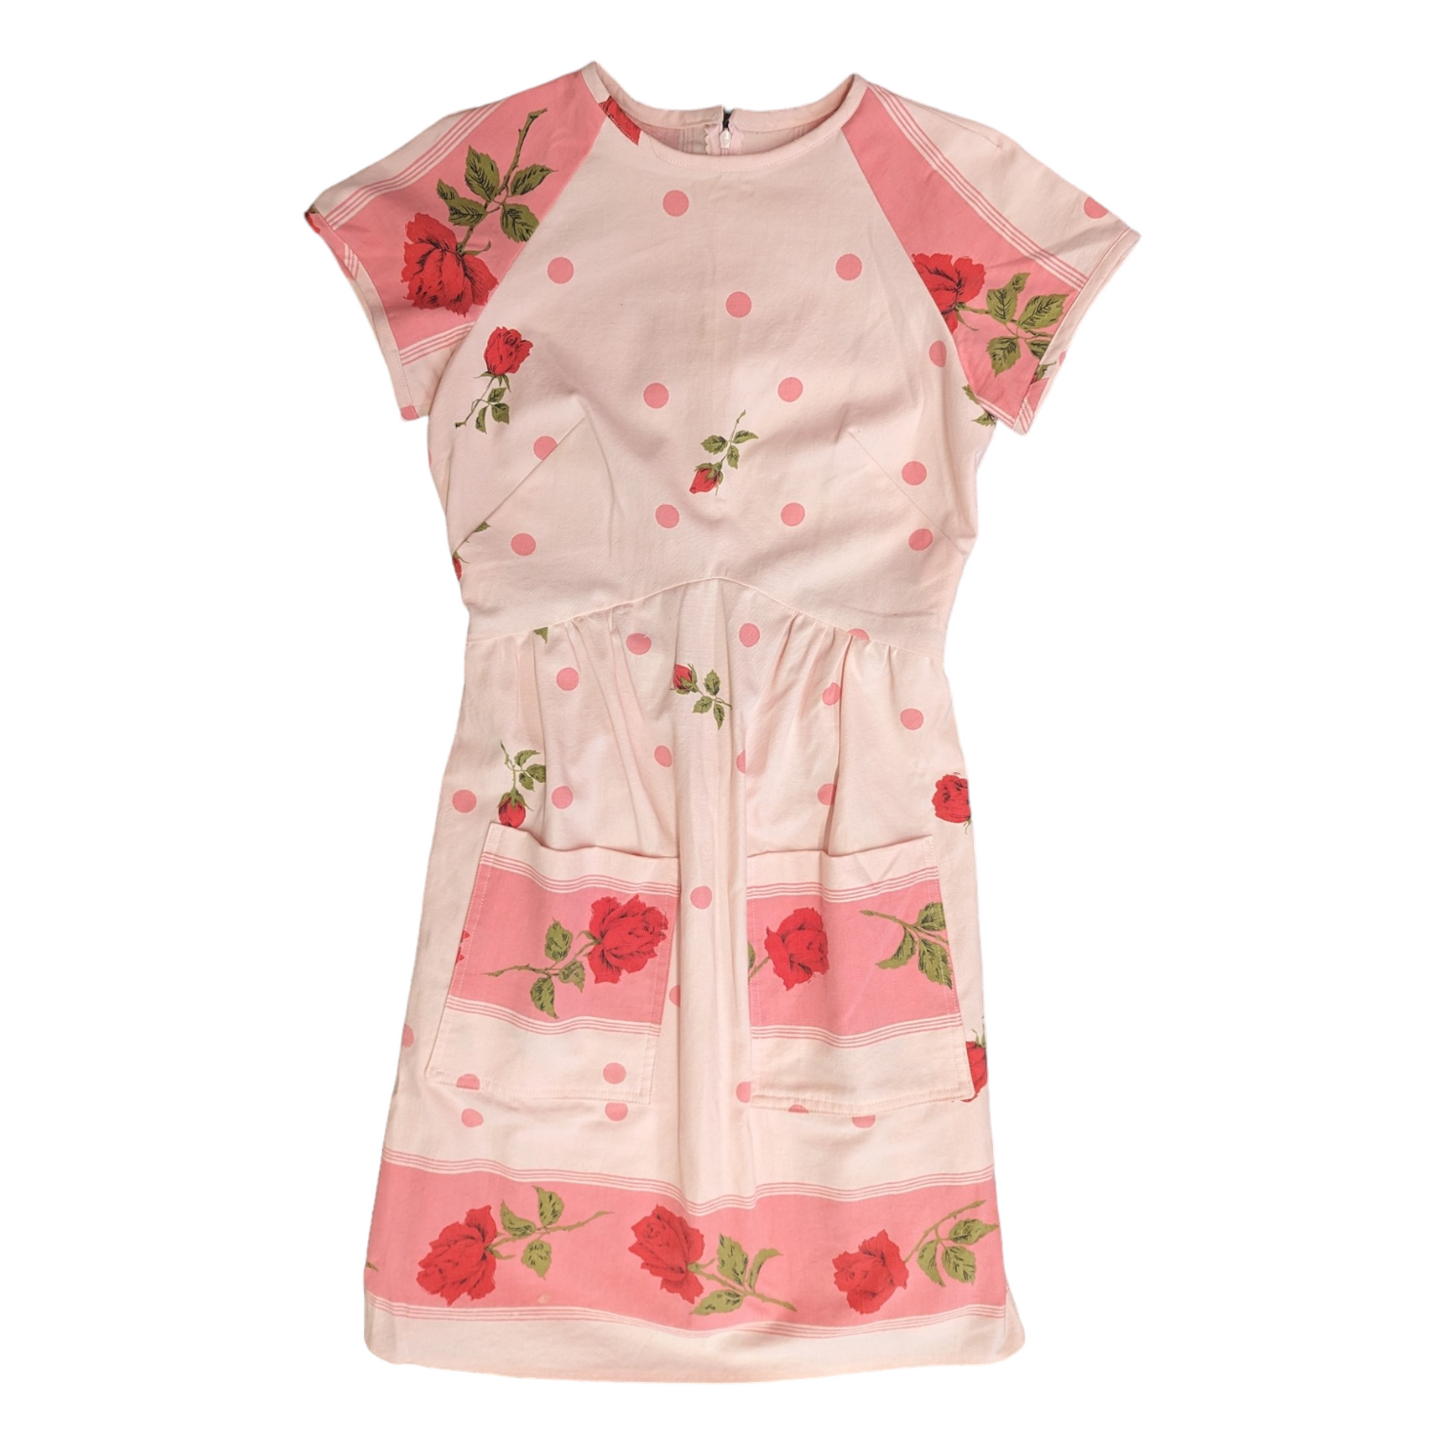 Coming Up Roses Day Dress by A.Thimbleberry